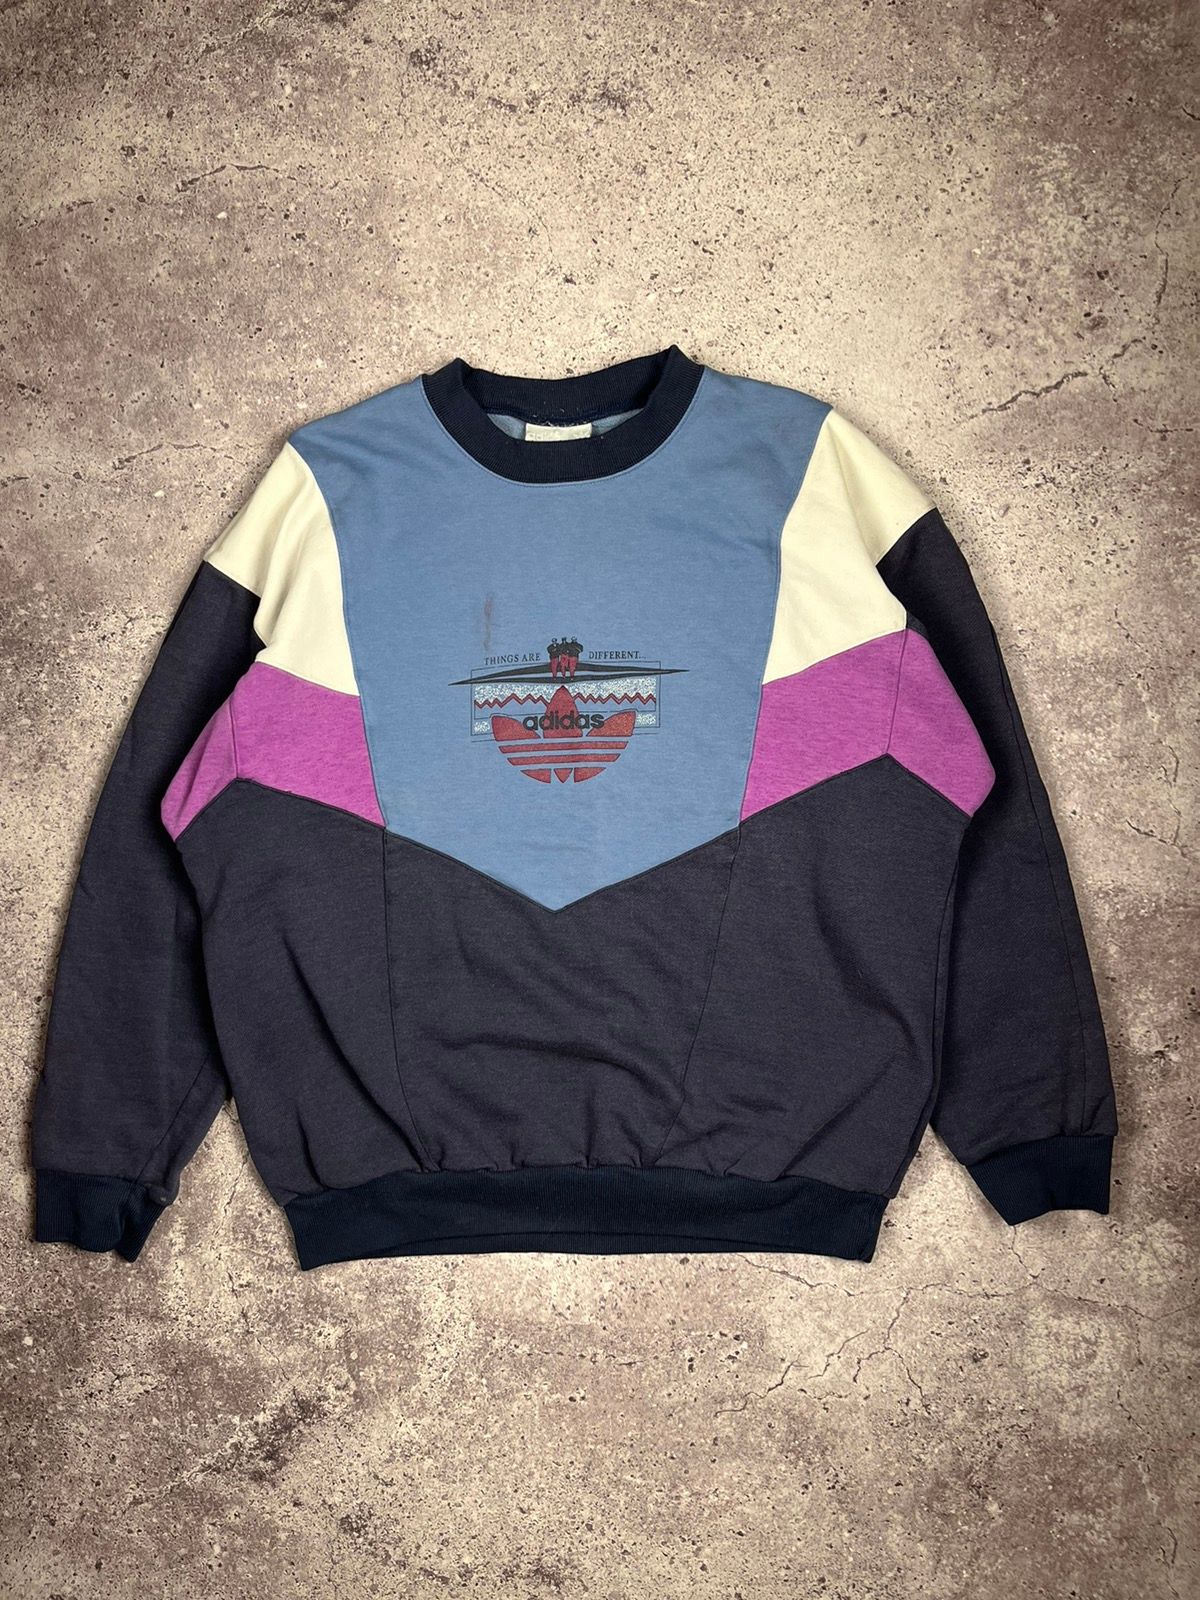 Pre-owned Adidas X Vintage Adidas Sweatshirt Vintage Think Are Different 90's In Black/blue/white